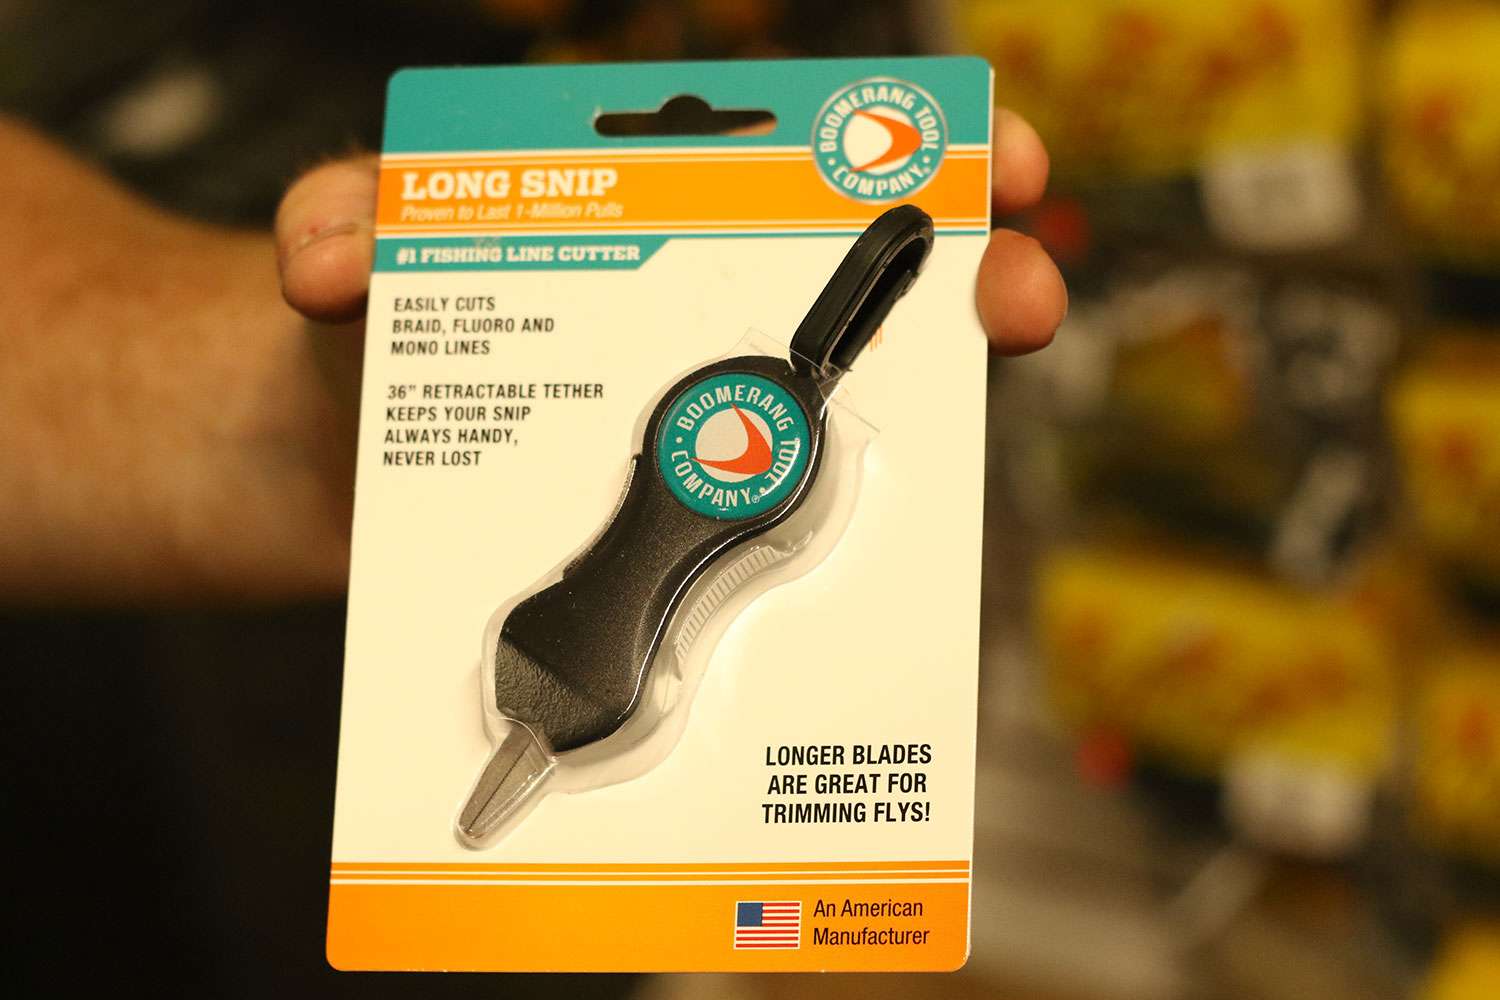 But first the famous Boomerang Tool.